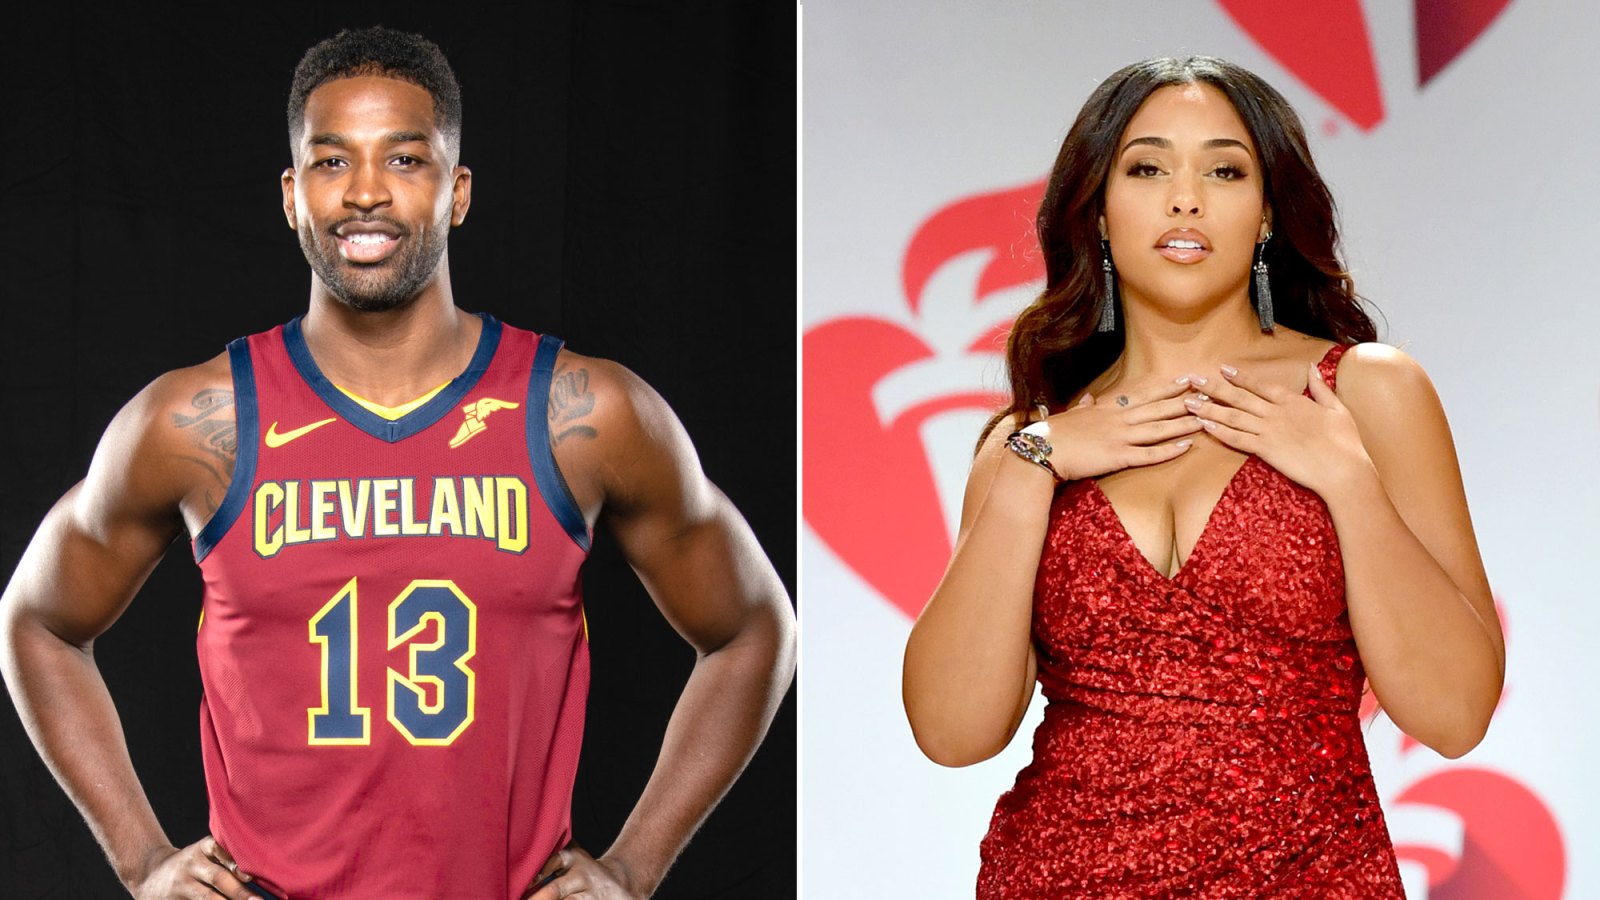 Tristan Thompson Seen for the First Time Since Jordyn Woods Scandal